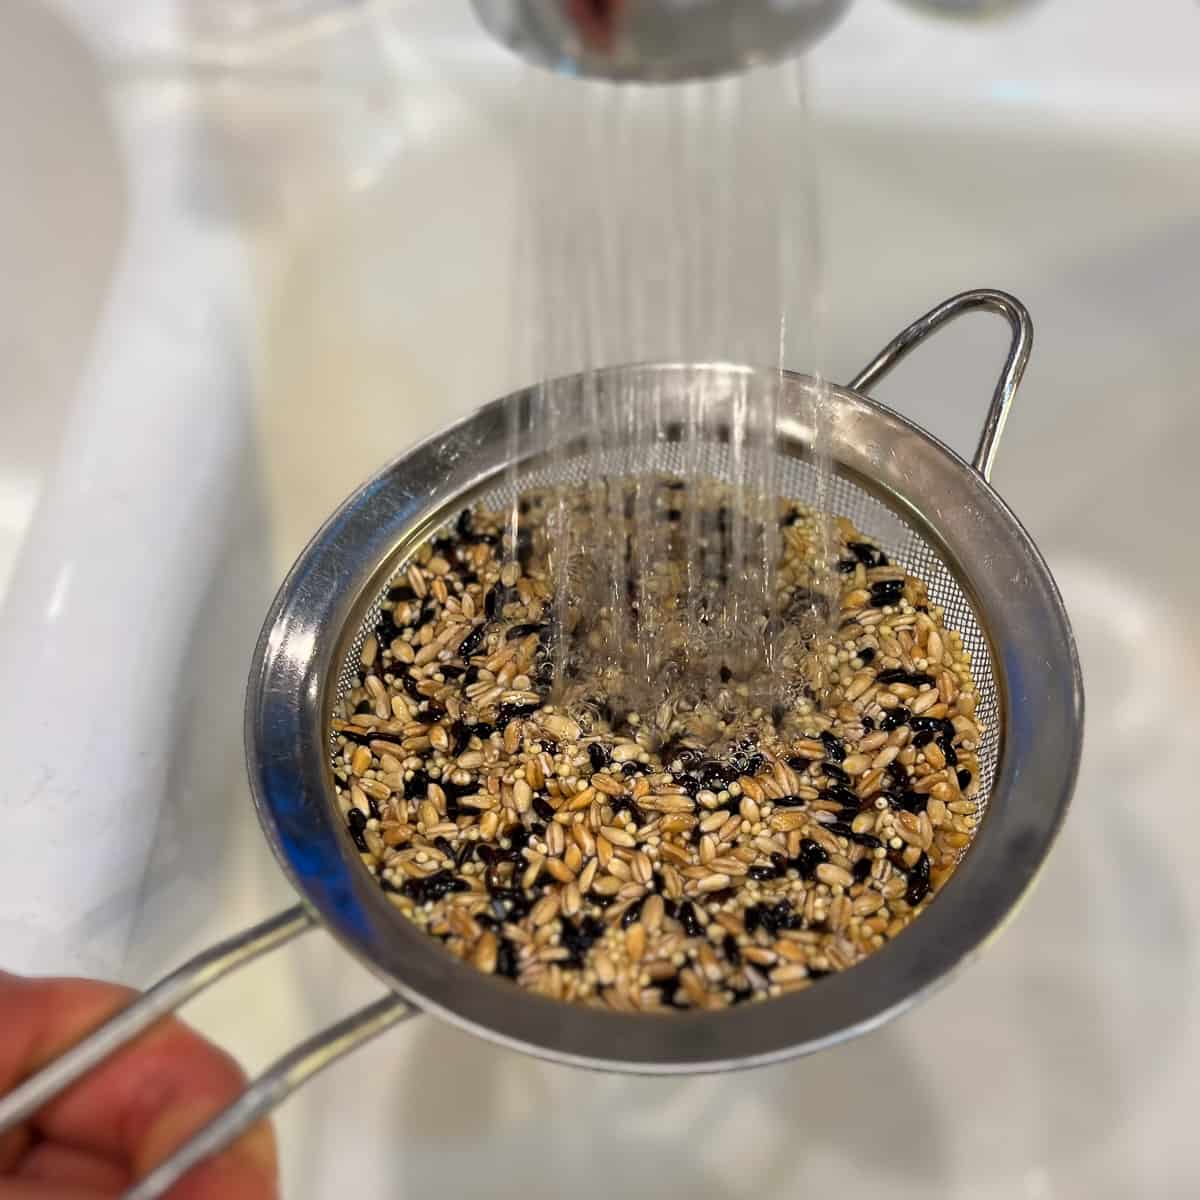 a fine mesh strainer with ancient grains being rinsed with running water over a white kitchen sink